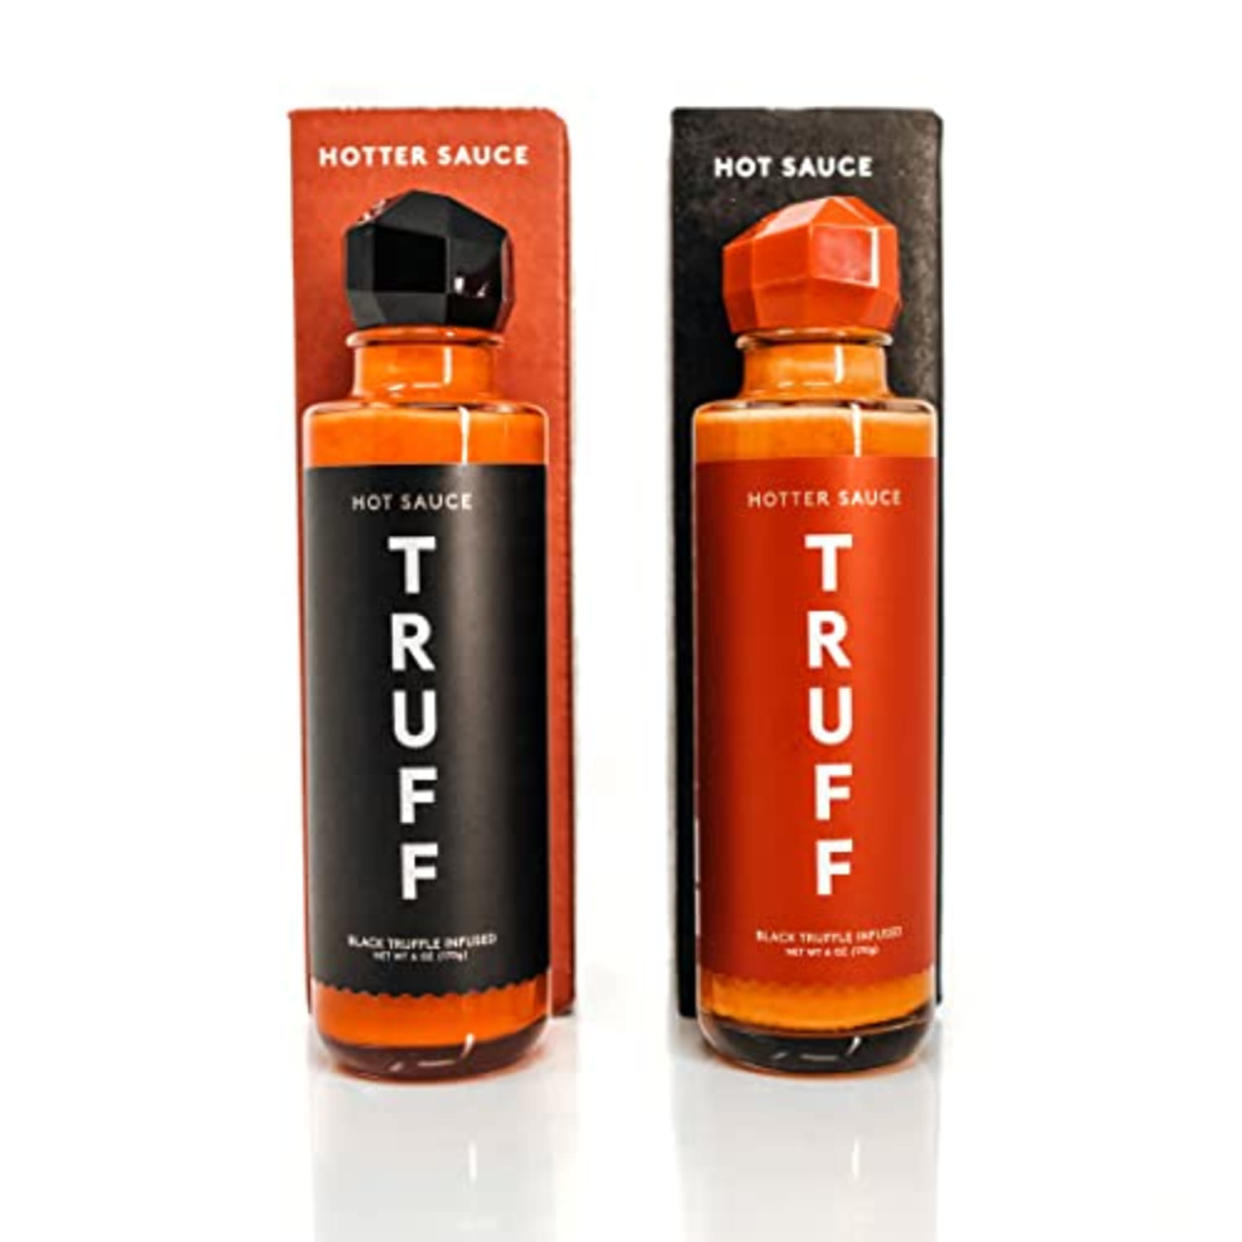 TRUFF Original and Hotter Black Truffle Hot Sauce 2-Pack Bundle, Gourmet Hot Sauce Set, Black Truffle and Chili Peppers, Gift Idea for the Hot Sauce Fans, An Ultra Unique Flavor Experience (6 oz, 2 count with Premium Box) (AMAZON)